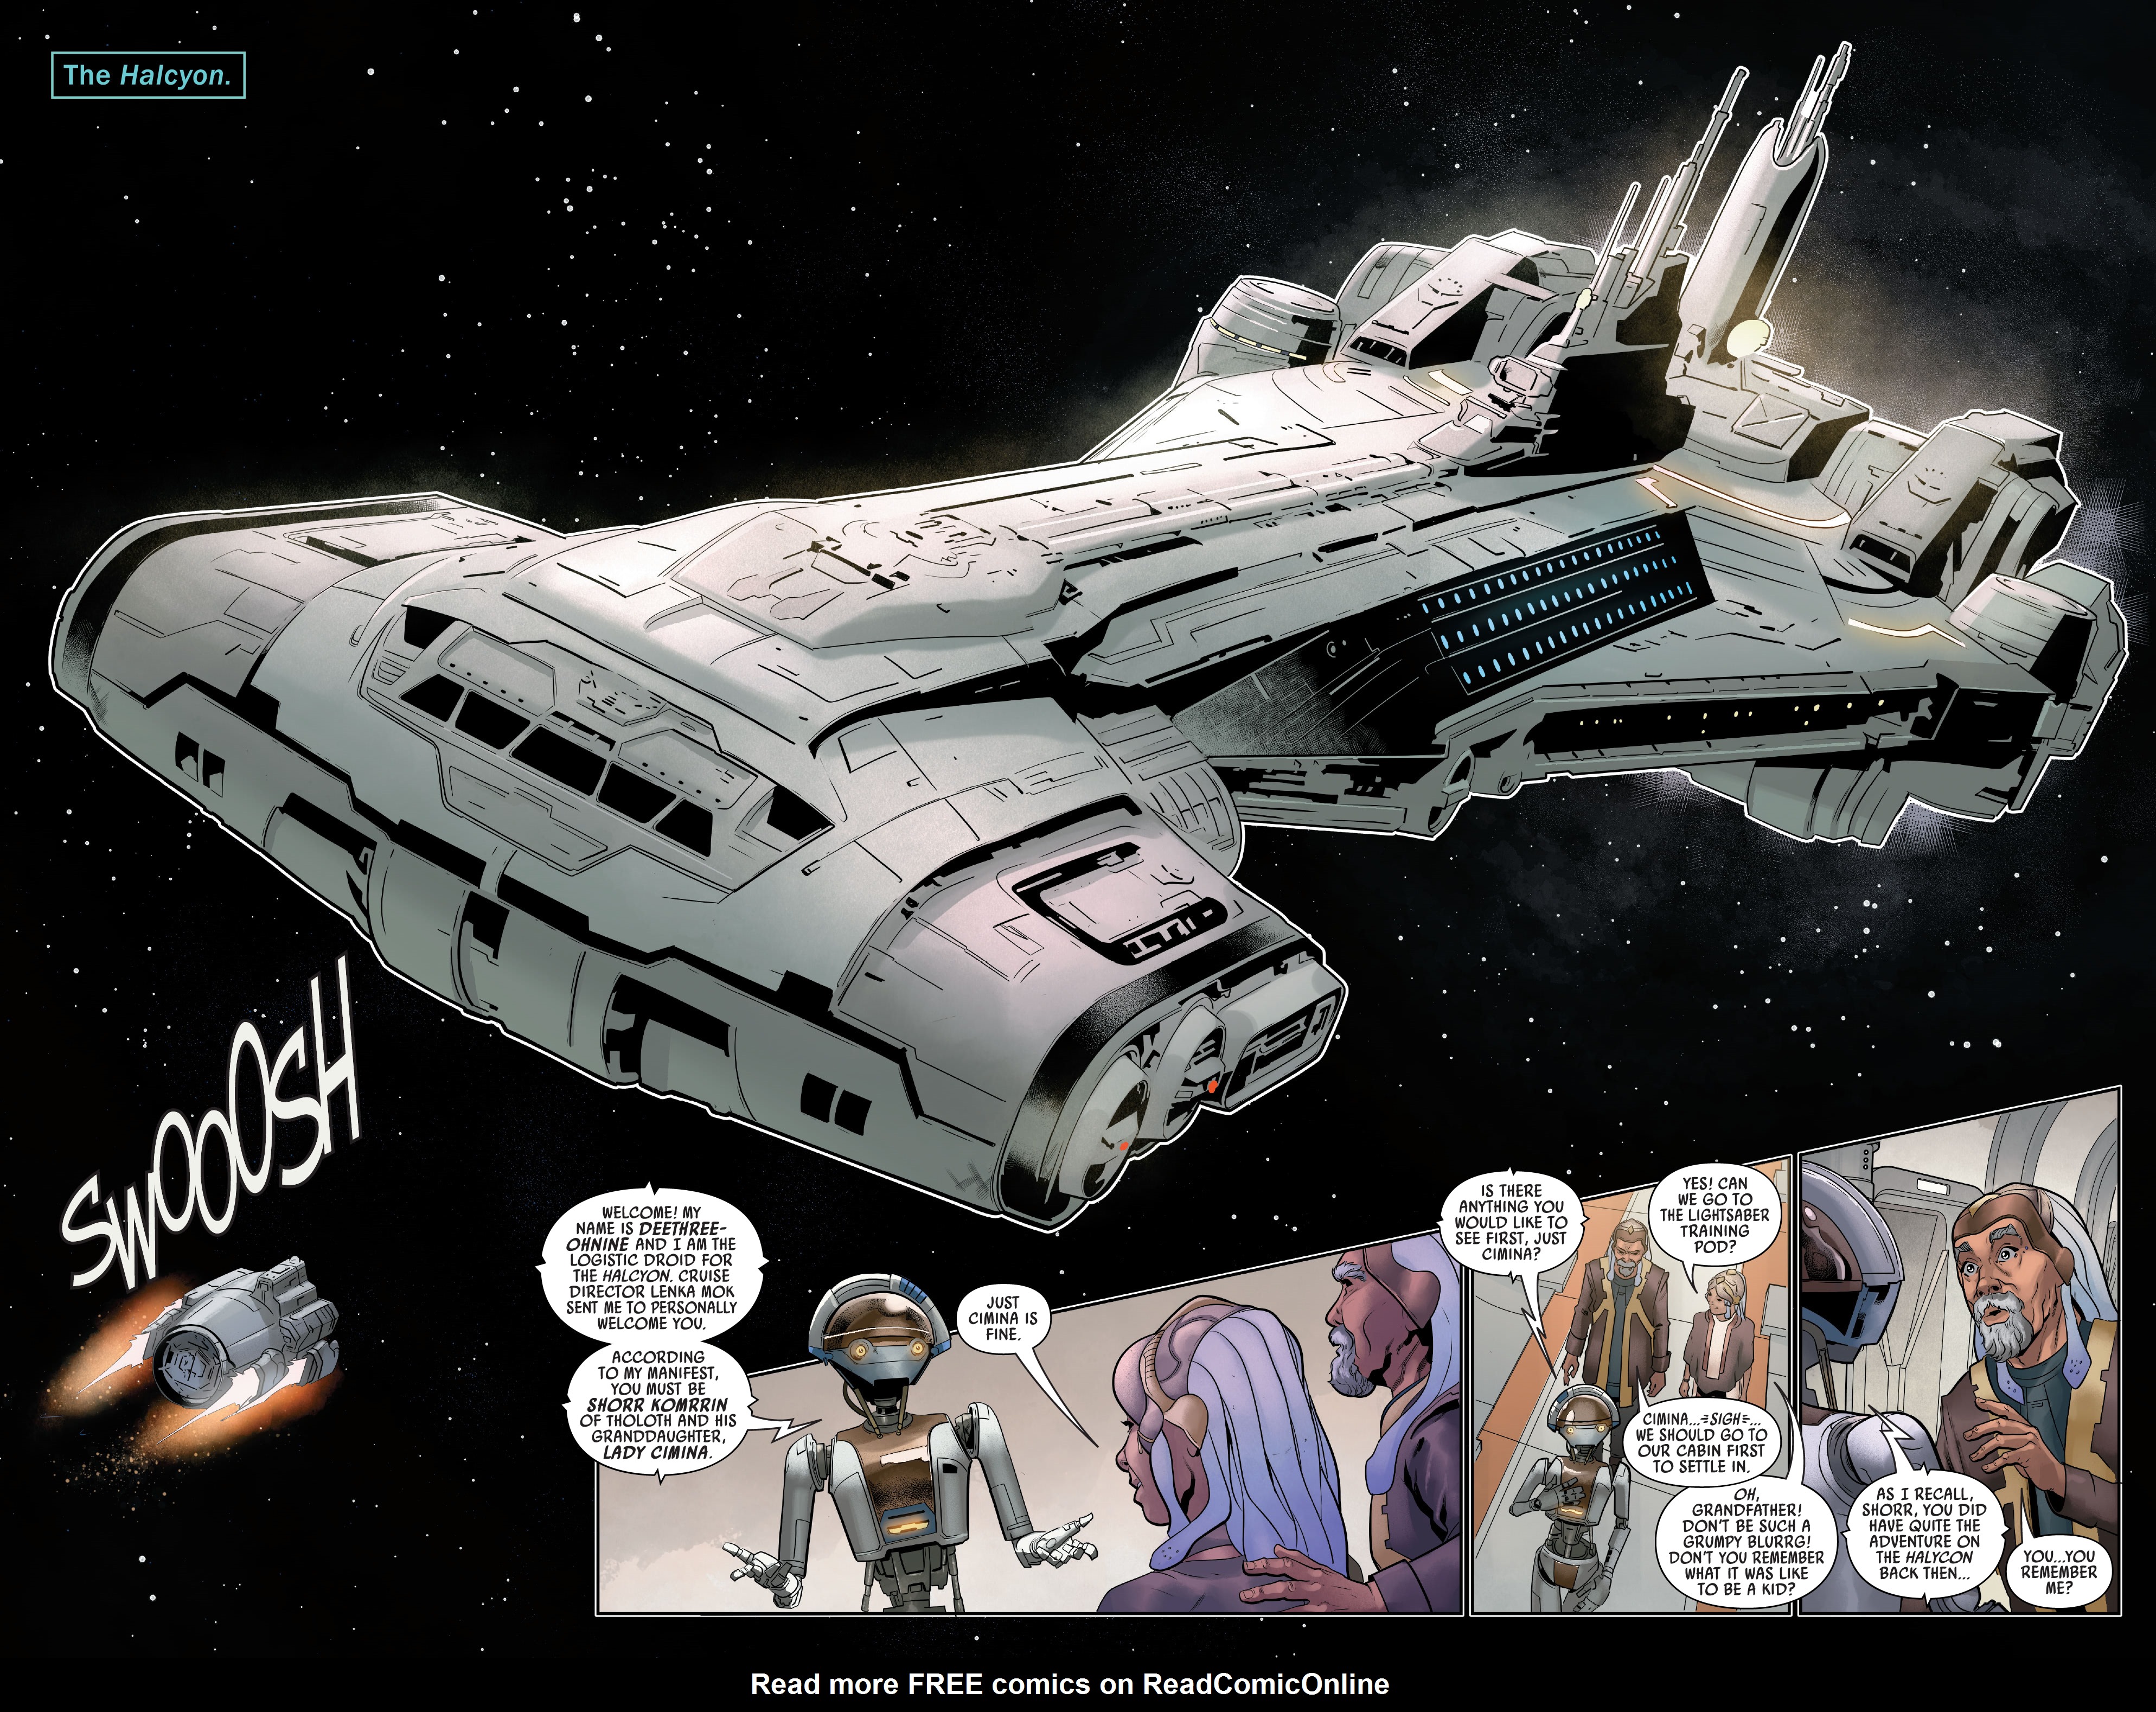 Read online Star Wars: The Halcyon Legacy comic -  Issue #1 - 3